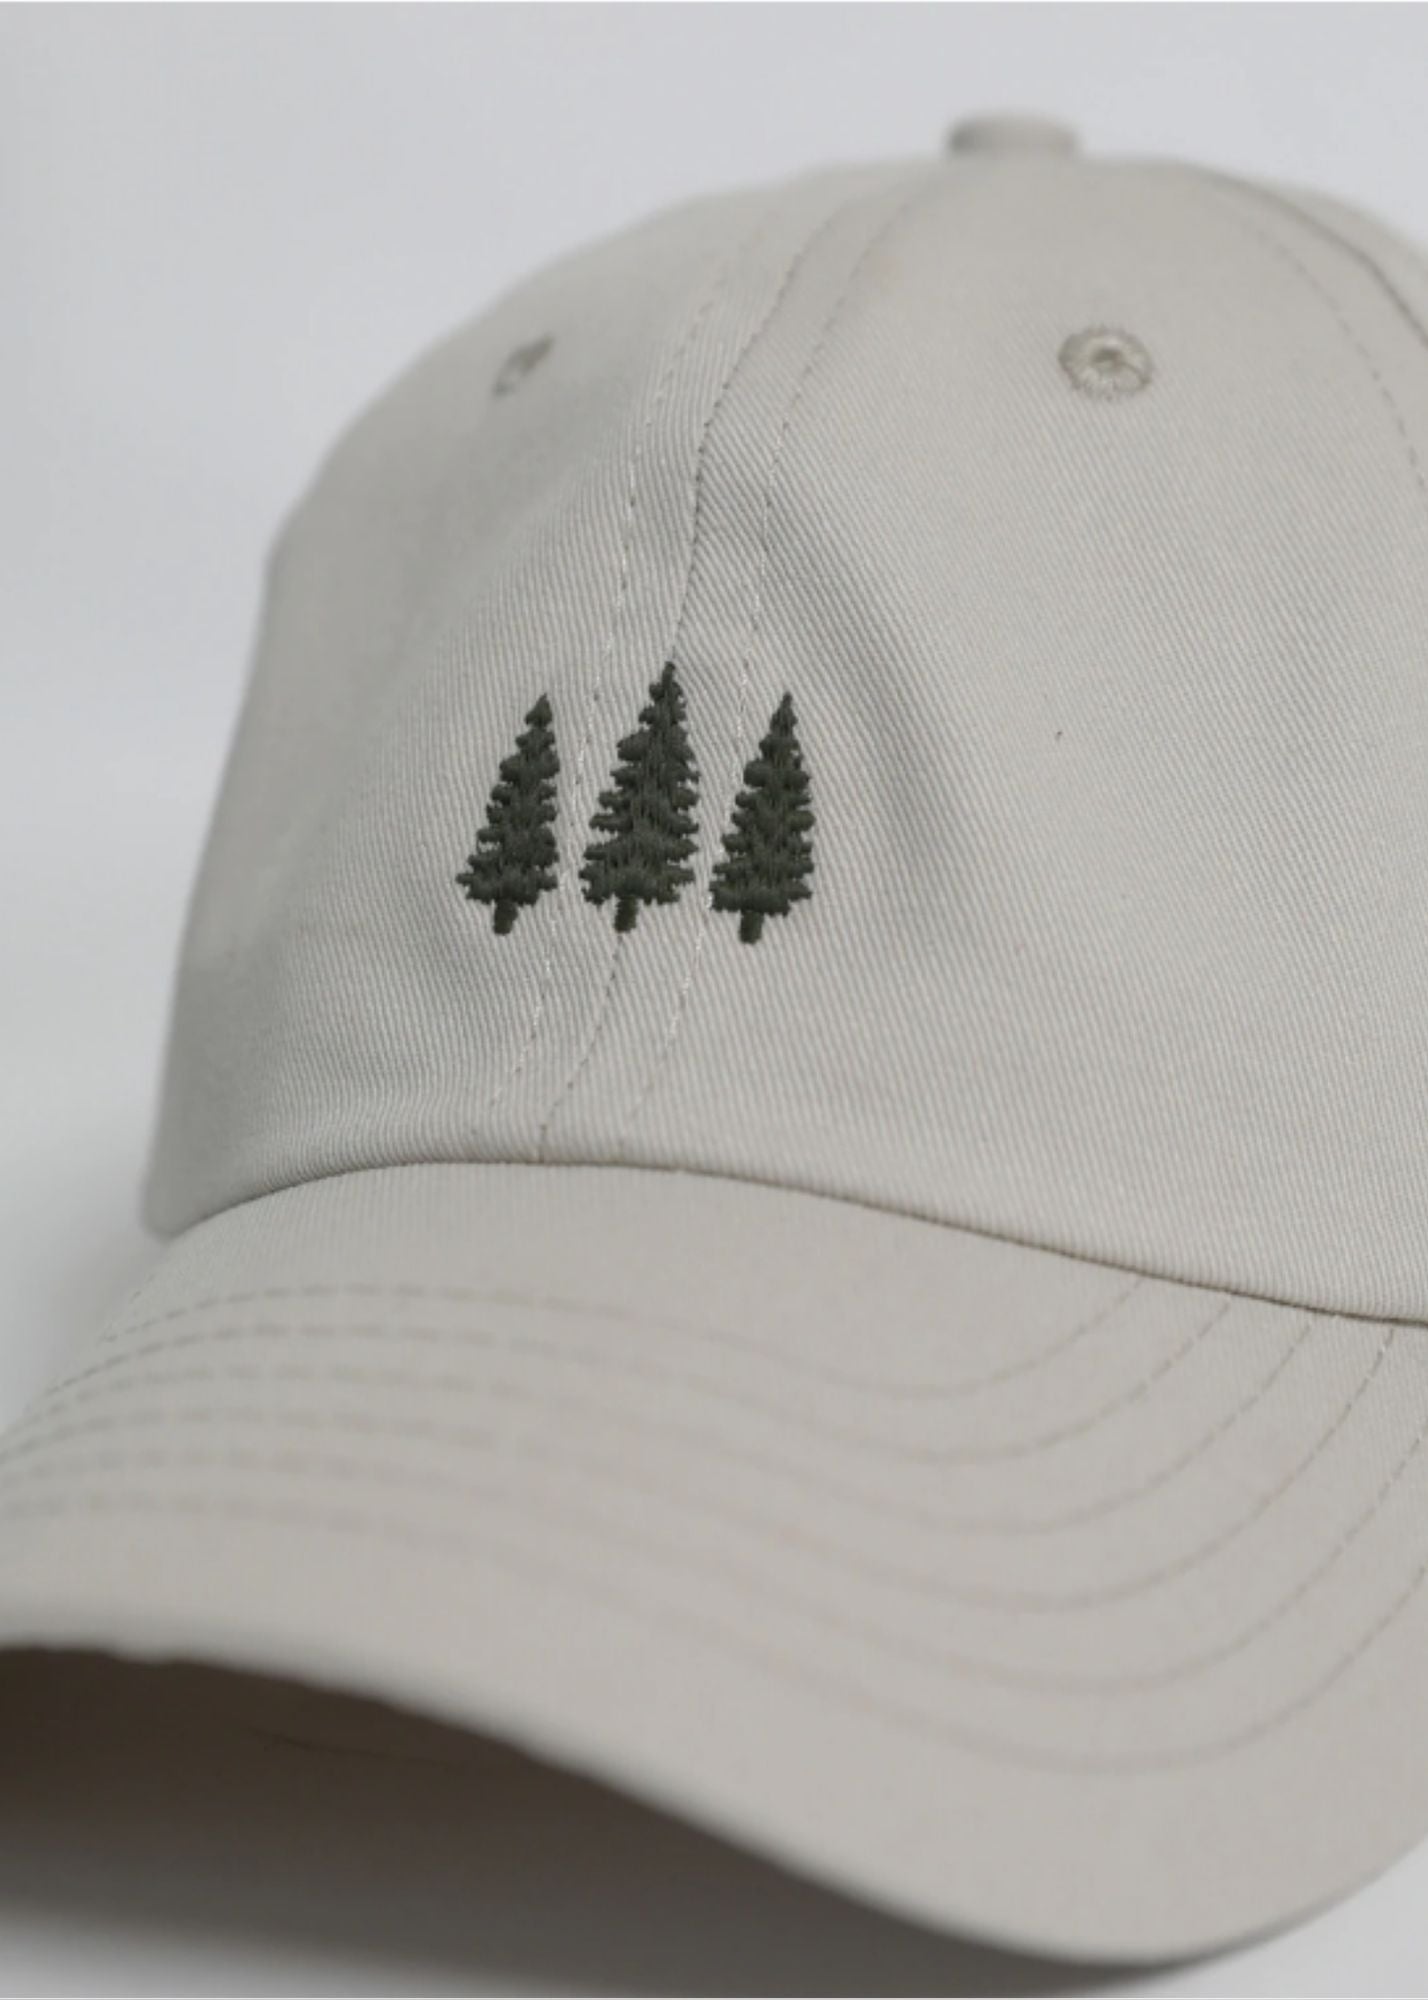 Embroidered Pine Tree Ballcap Hat Accessories